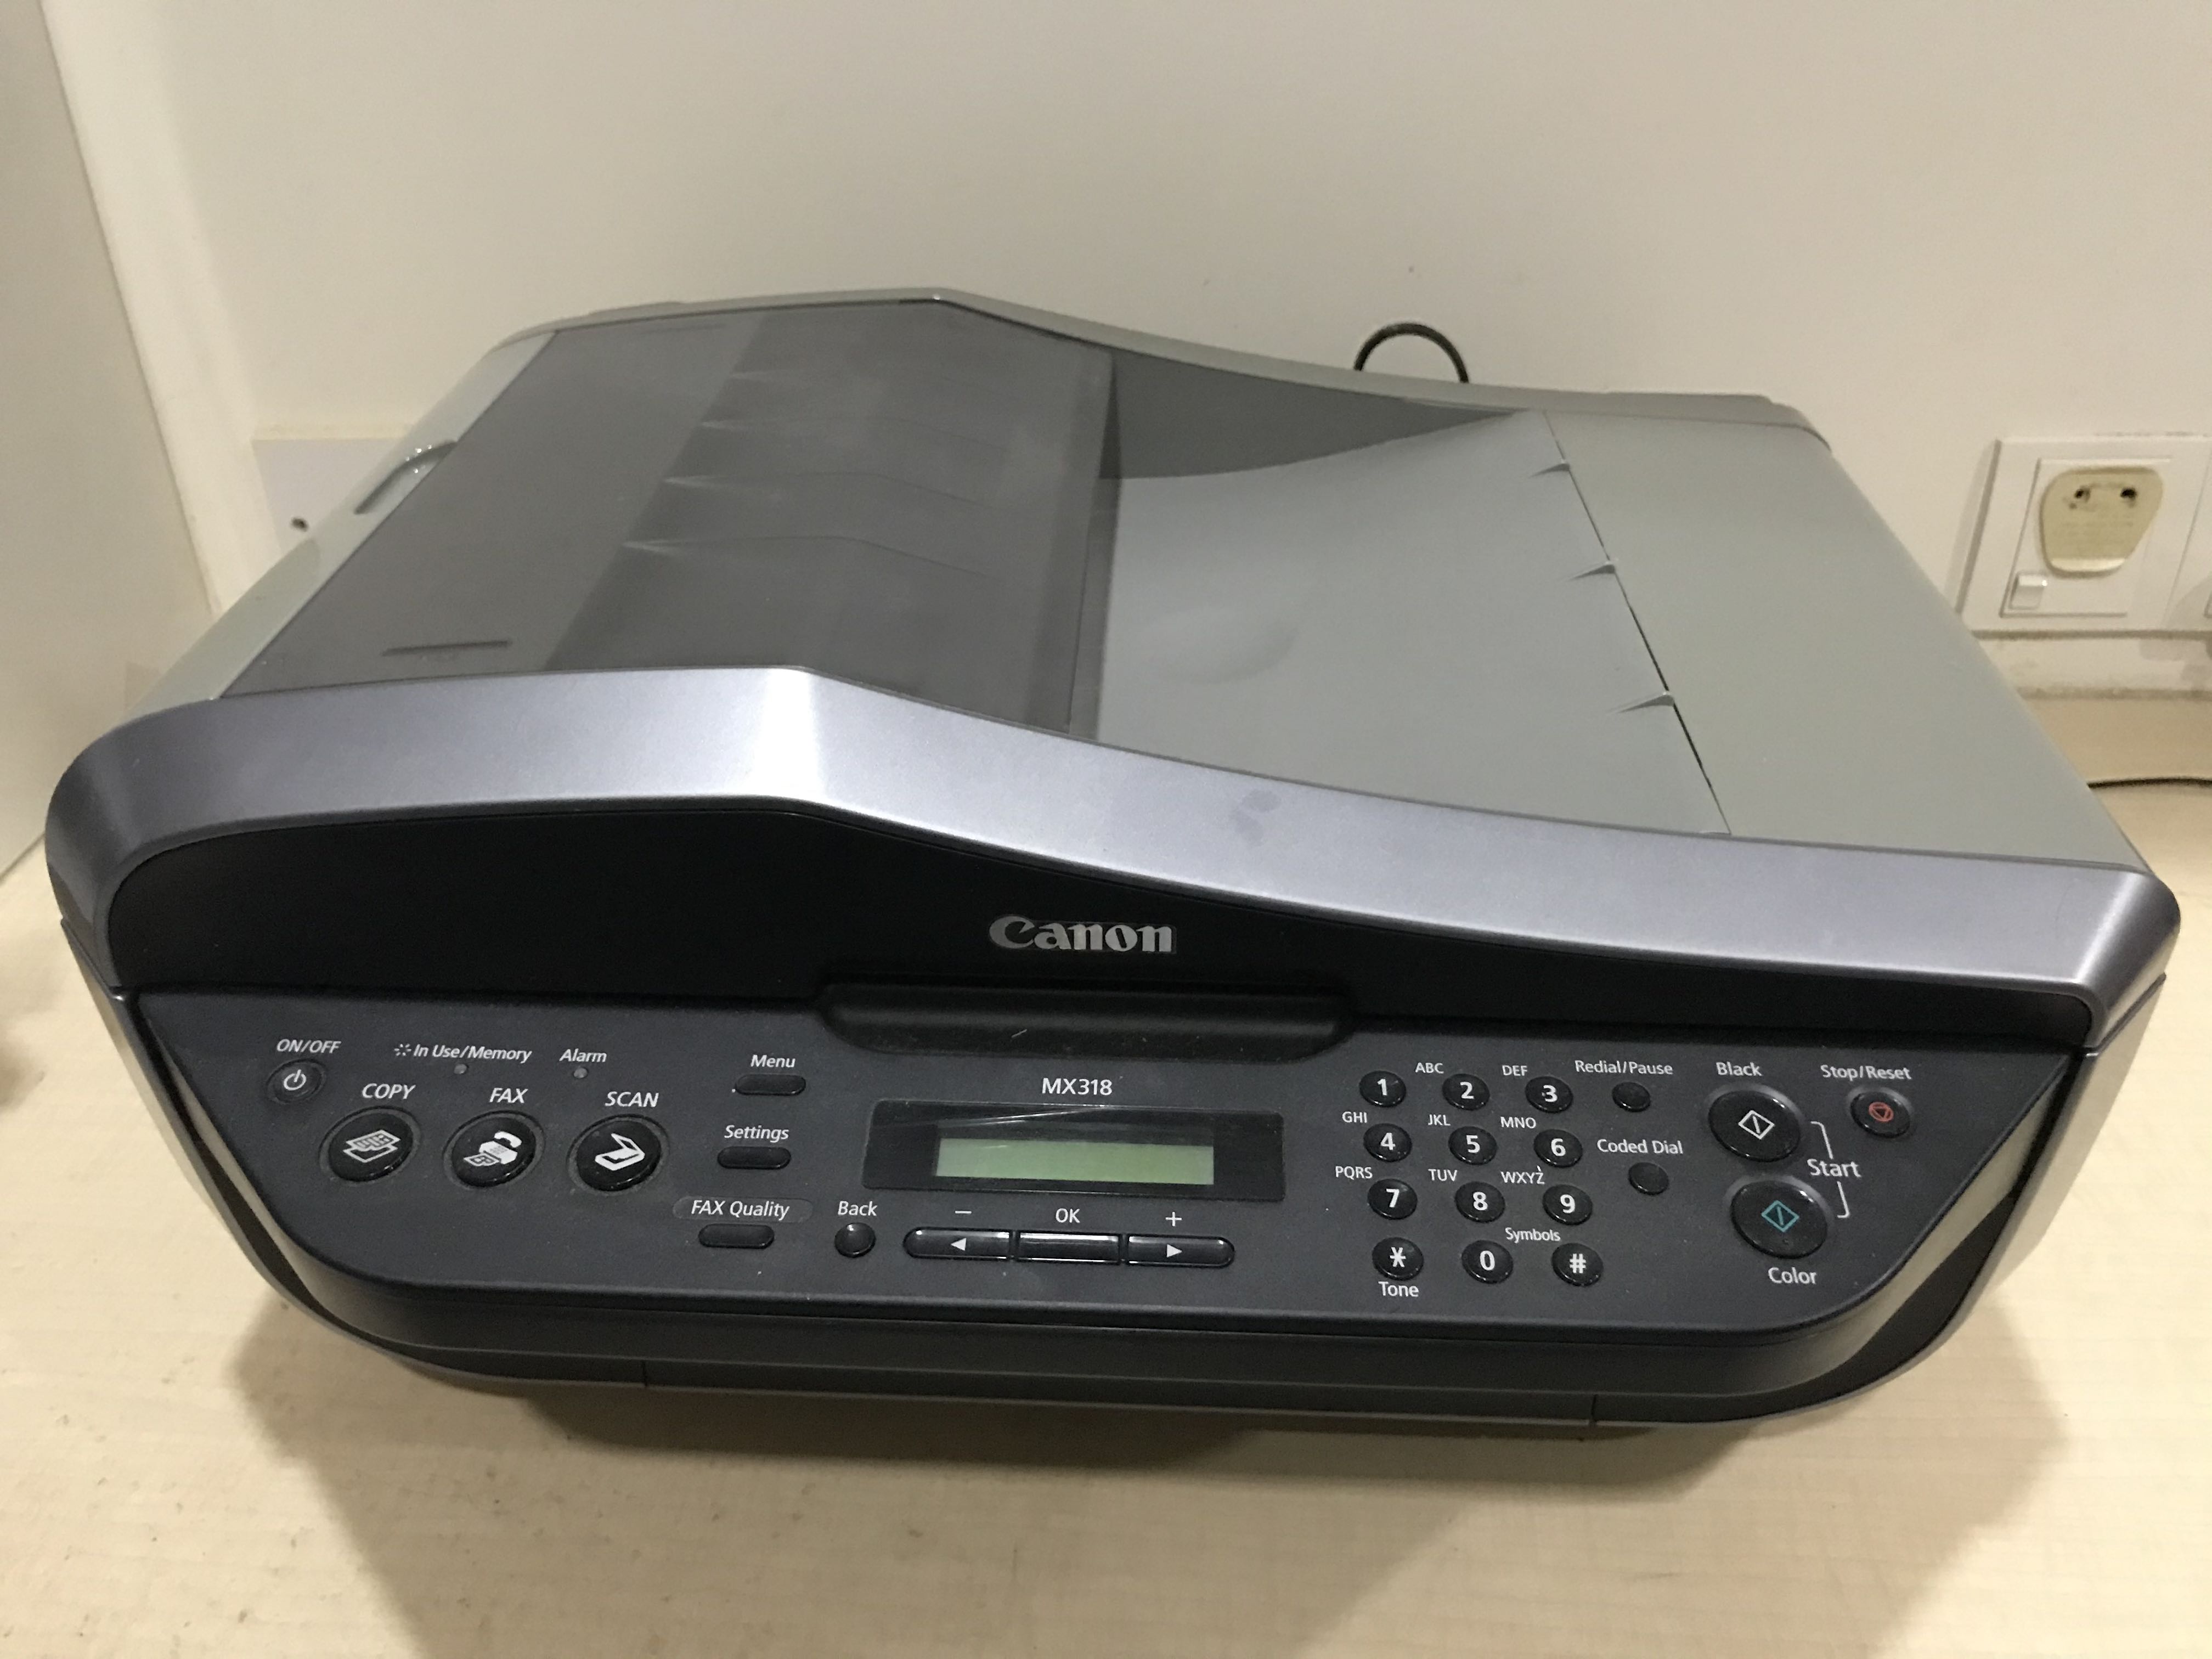 Canon Pixma Mx318 Inkjet 4 In 1 Printer Electronics Computer Parts Accessories On Carousell